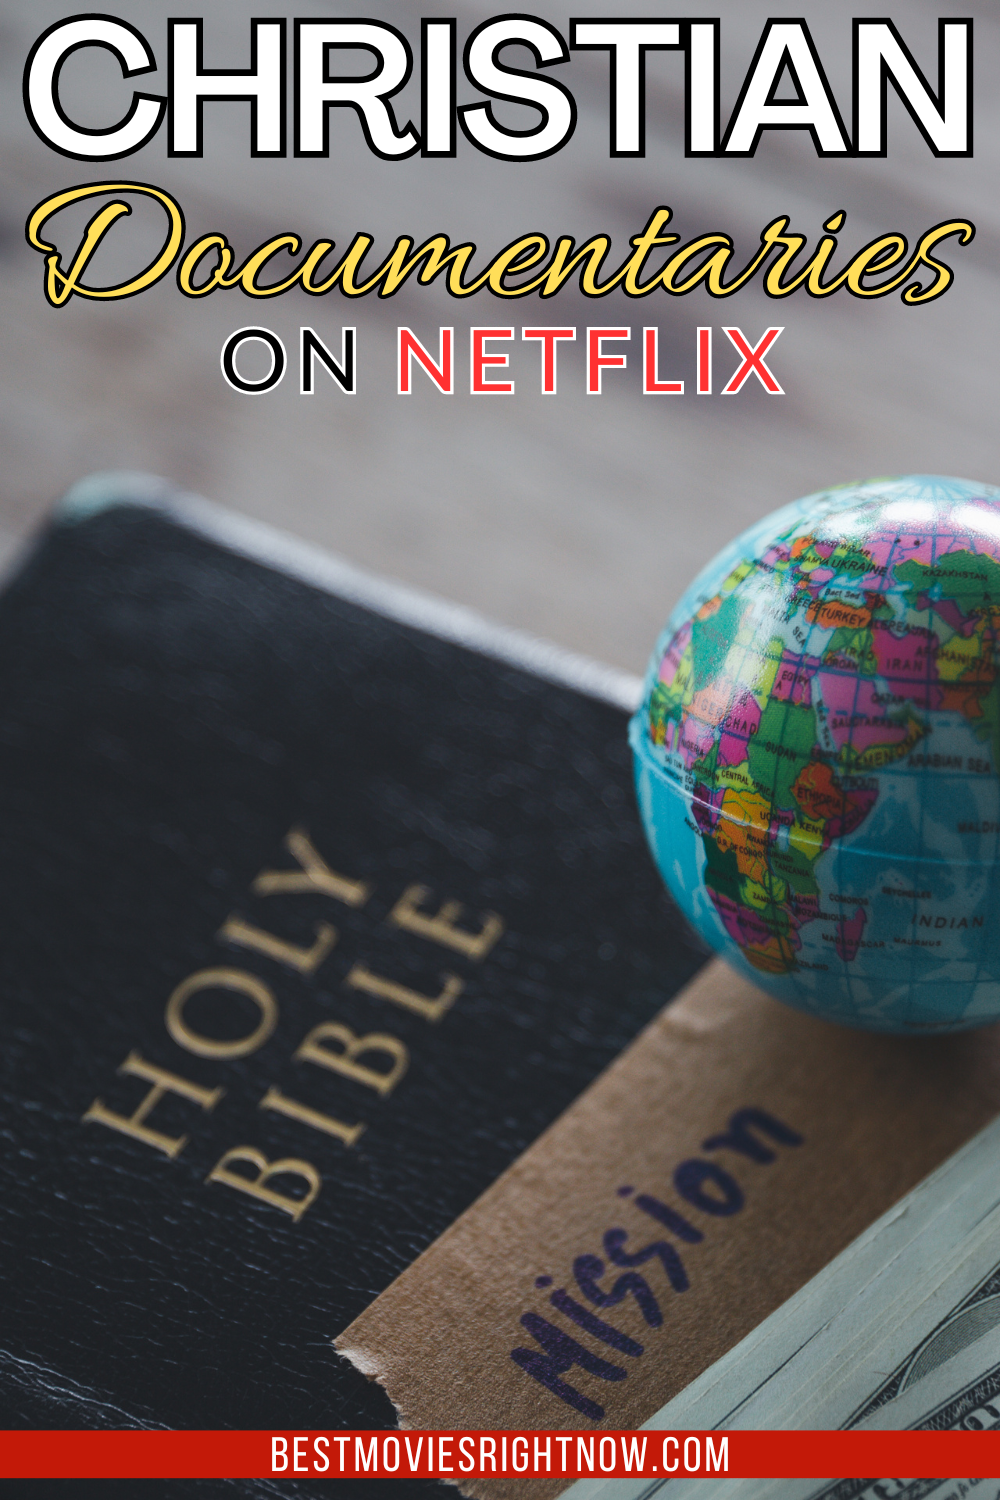 Globe with Holy Bible for mission, mission Christian idea bible and book on wooden table with text: "Christian Documentaries on Netflix"